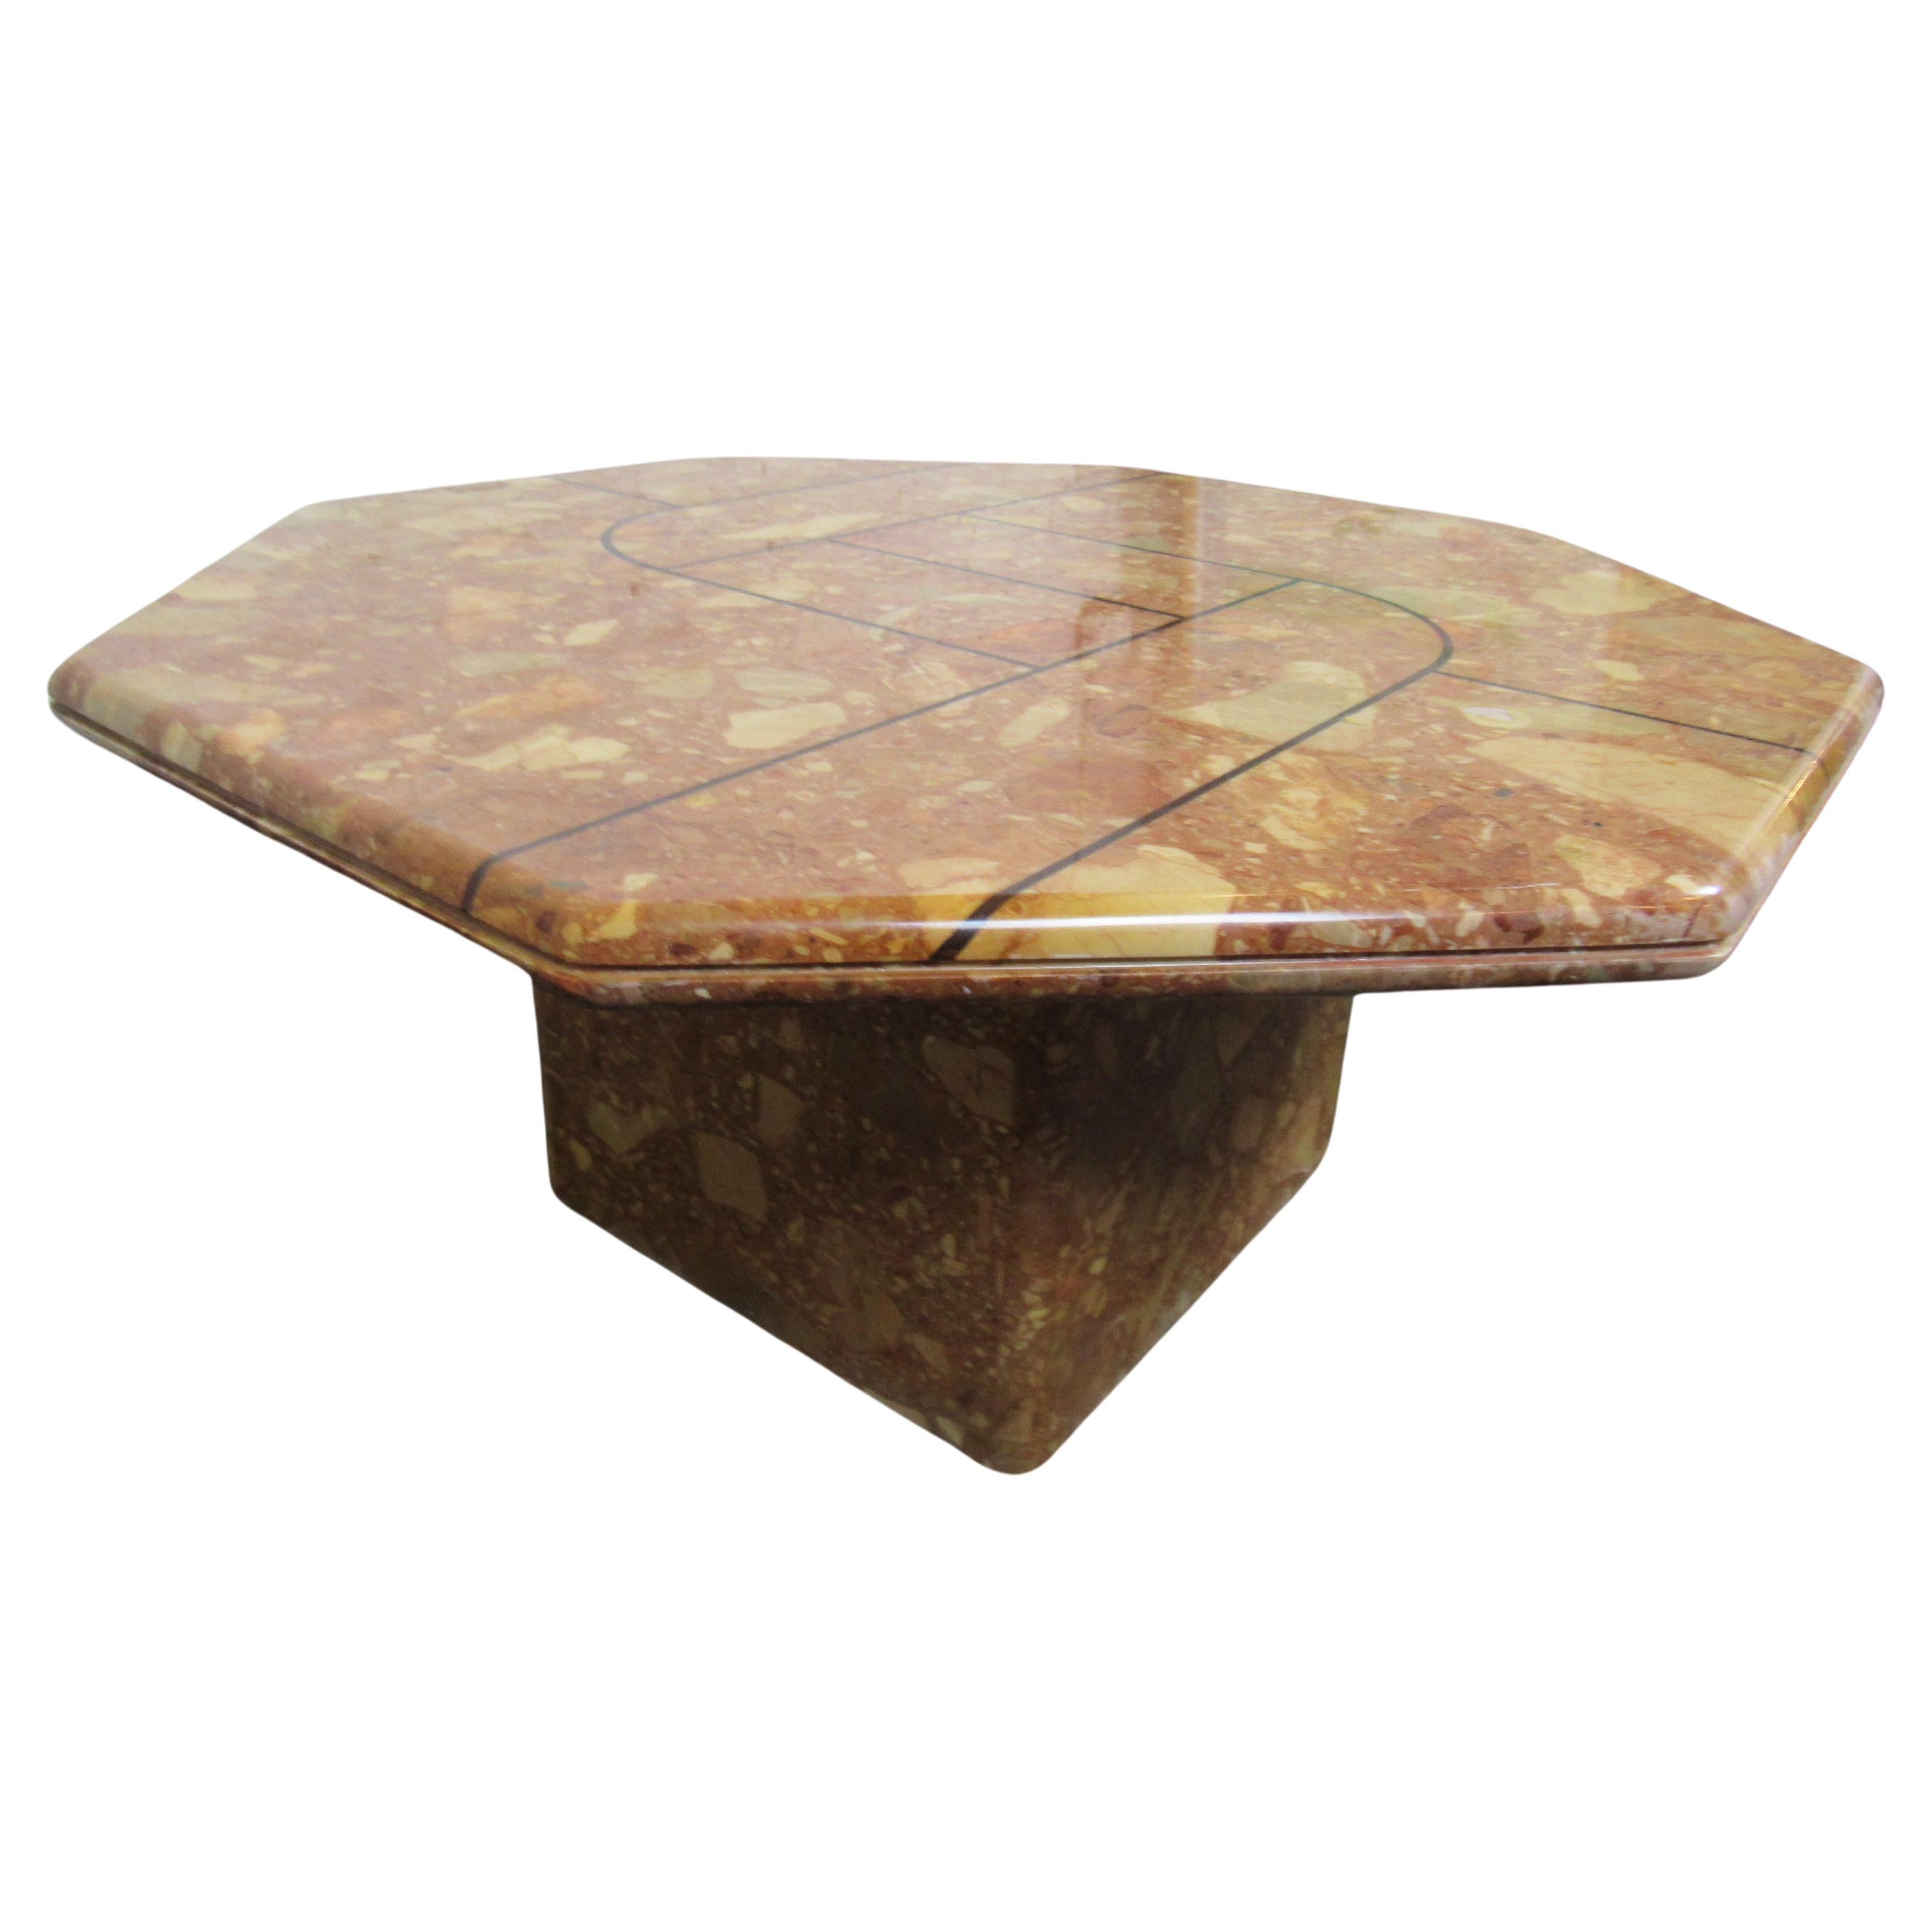 Unique salmon colored, solid stone side table or coffee table. Top piece can be removed from the base easily. 
(Please confirm item location - NY or NJ - with dealer).
 